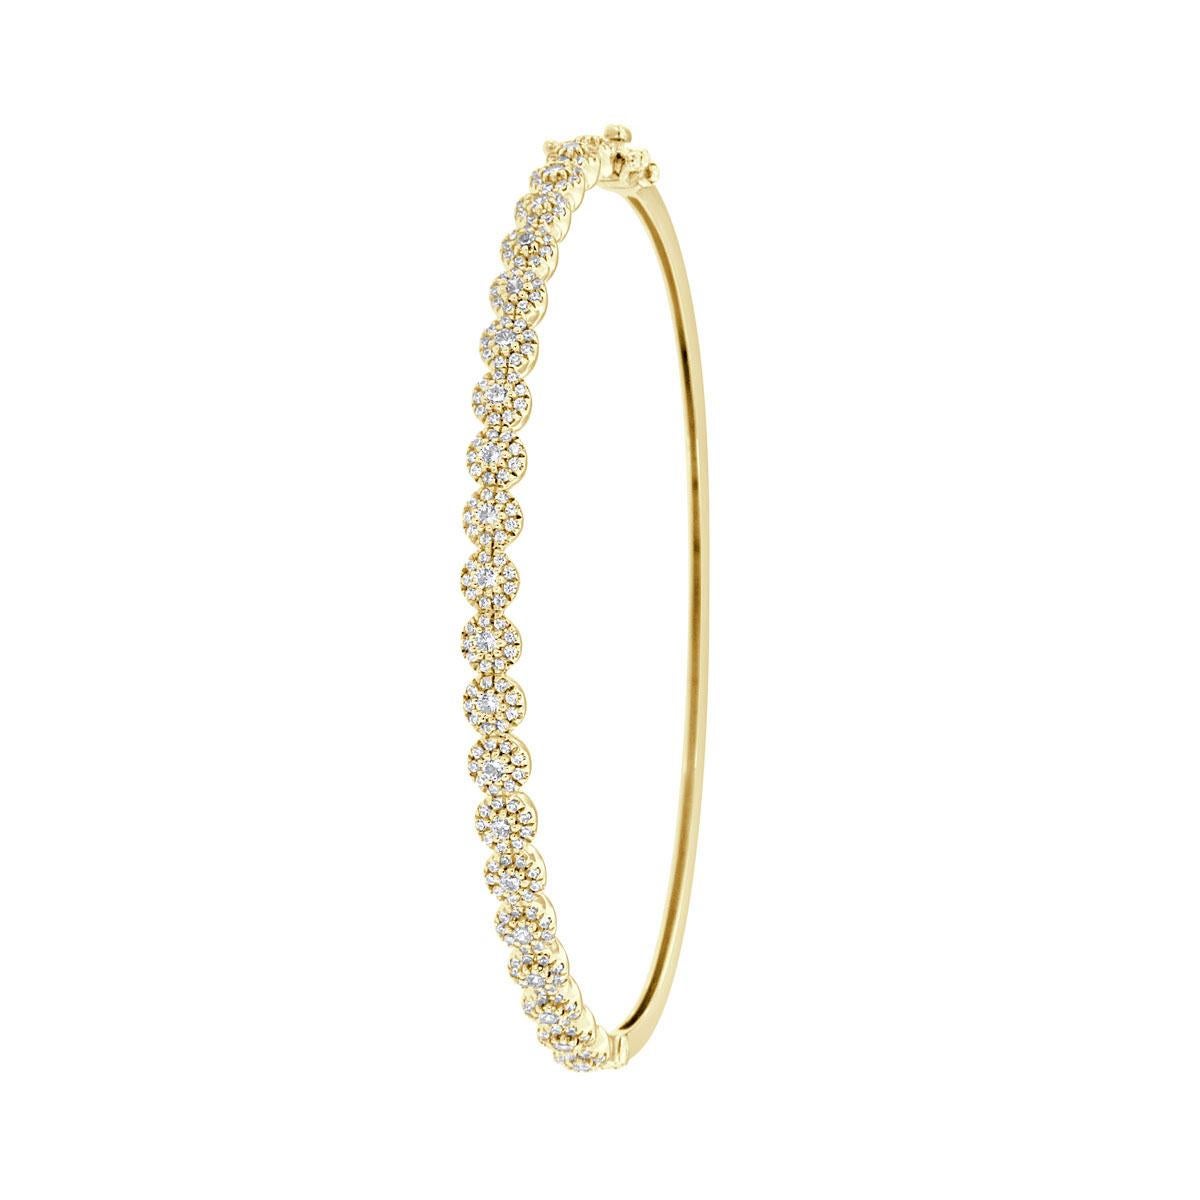 This petite halo bangle features round brilliant diamonds micro-prong-set for maximum brilliance. Experience the difference!

Product details: 

Center Gemstone Type: NATURAL DIAMOND
Center Gemstone Color: WHITE
Center Gemstone Shape: ROUND
Center